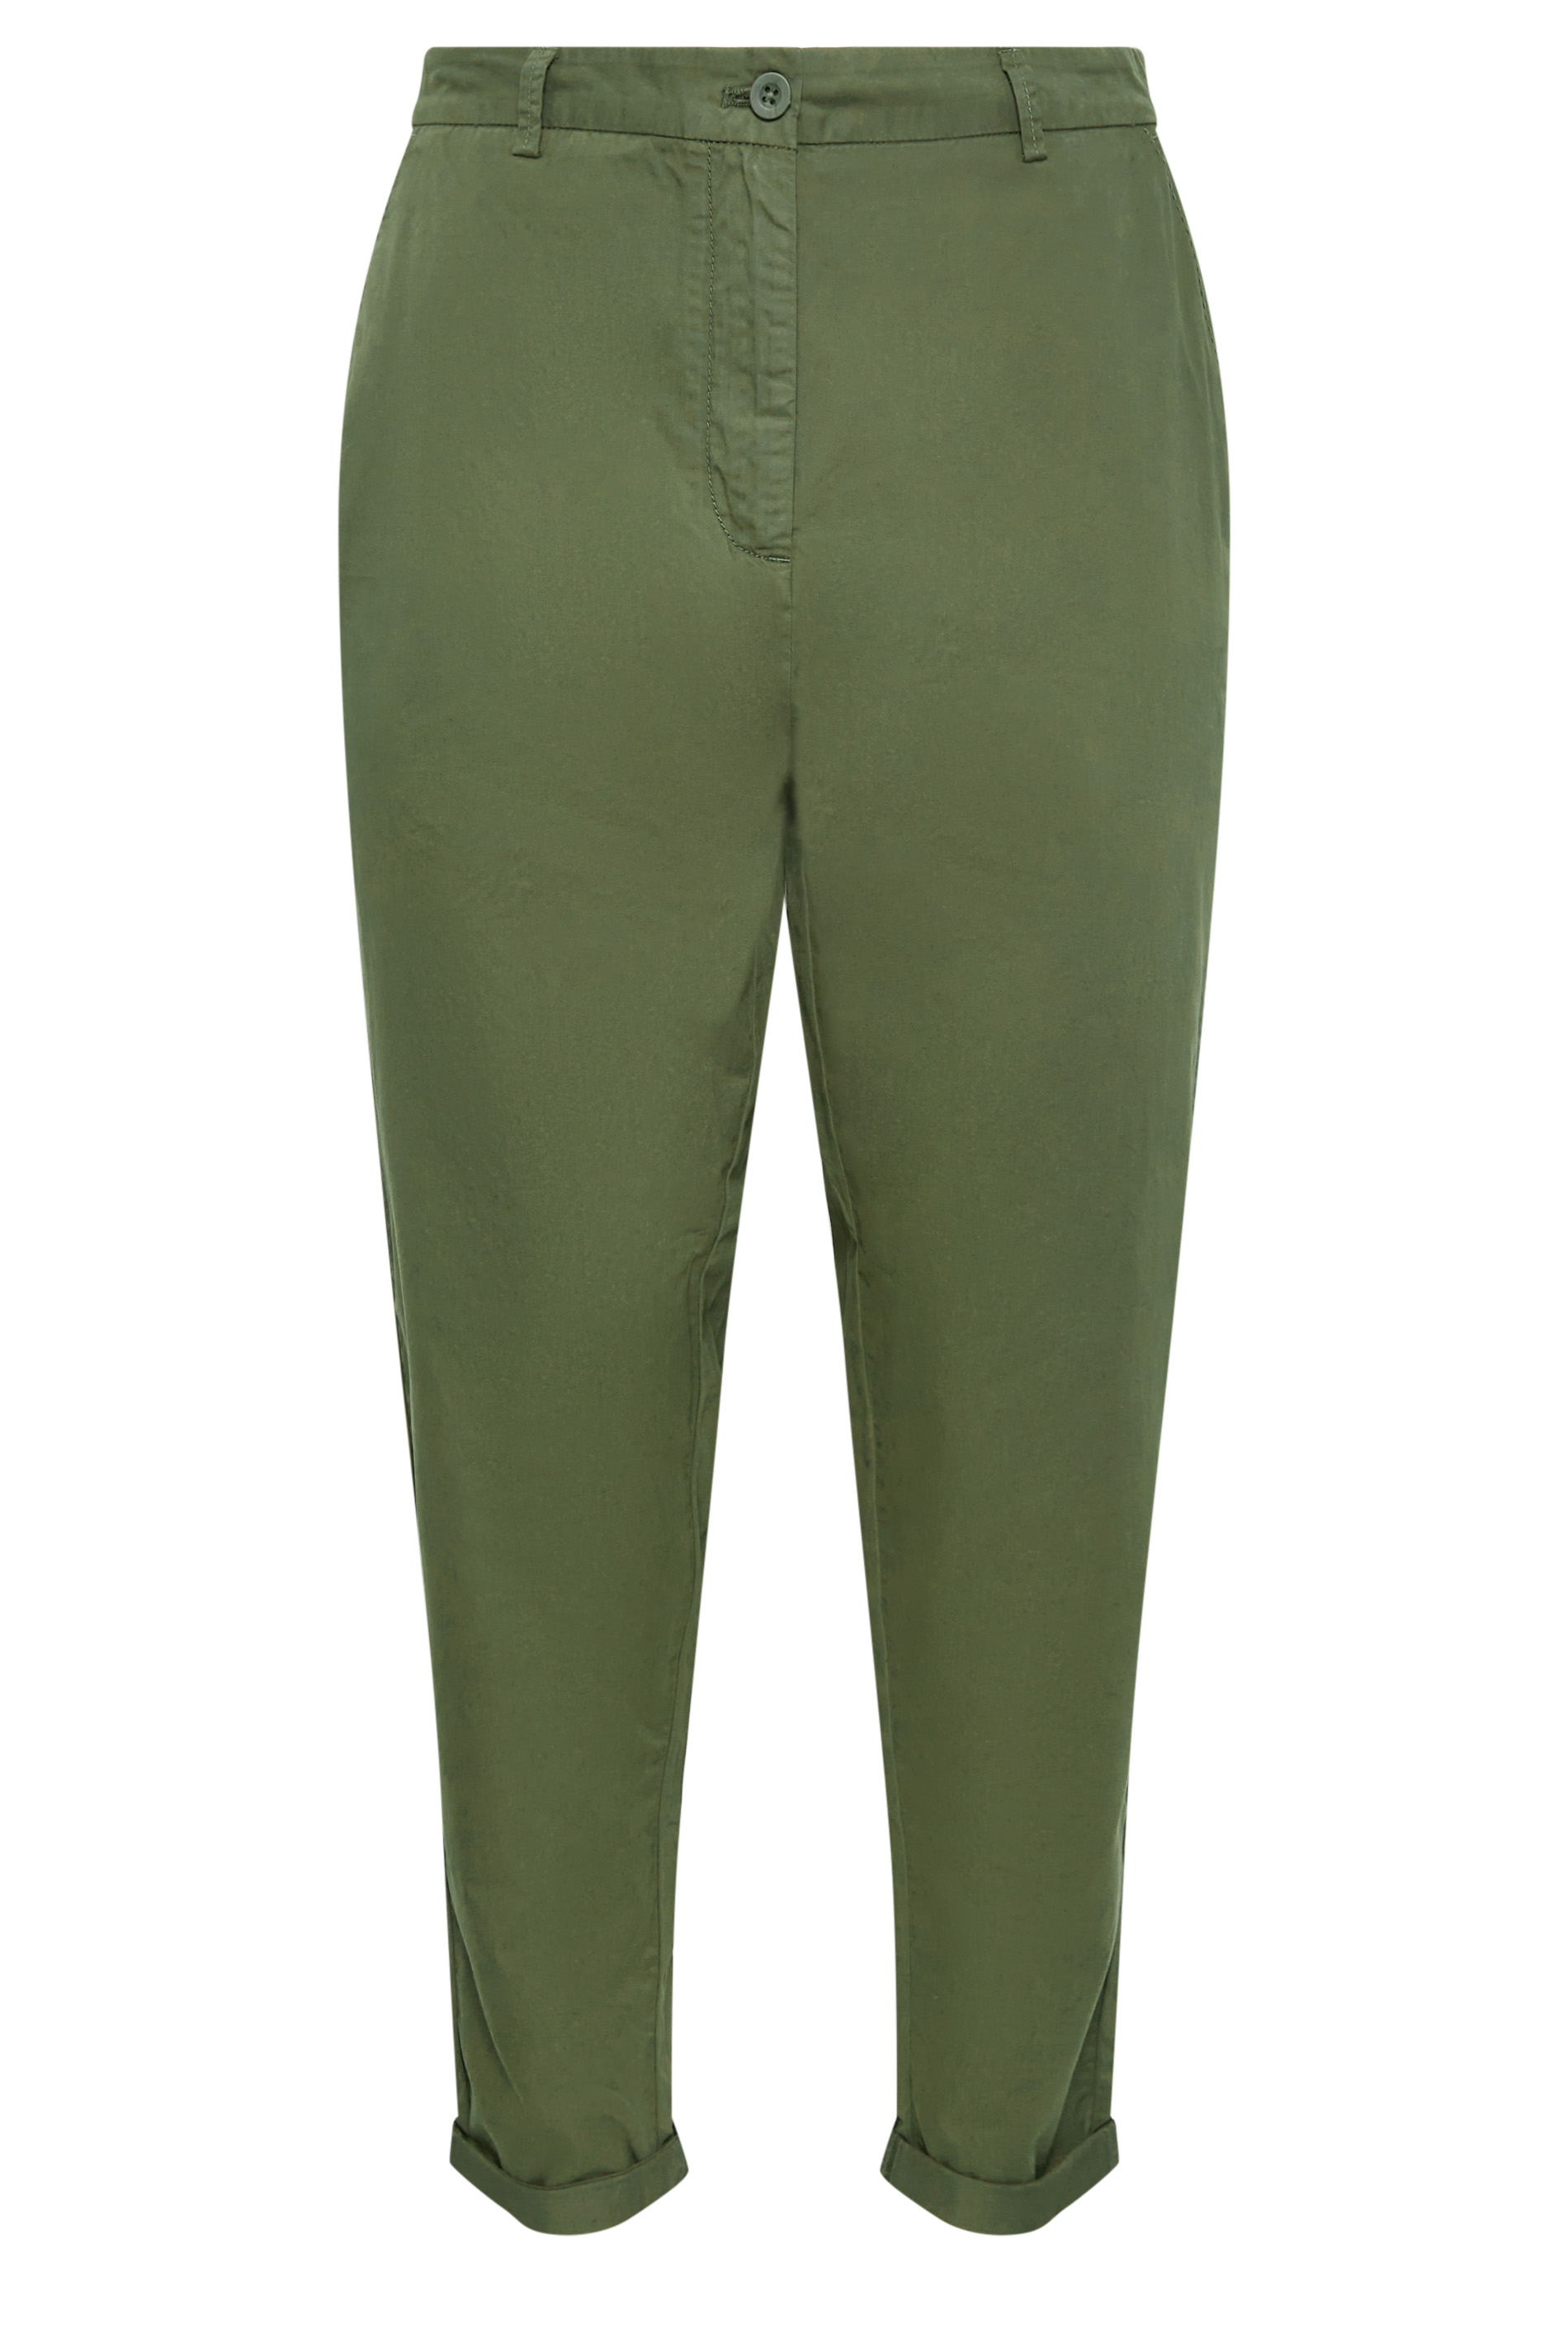 A New Day NWOT Women's 0 Green Mid-Rise Stretch Relaxed Straight Leg Chino  Pants